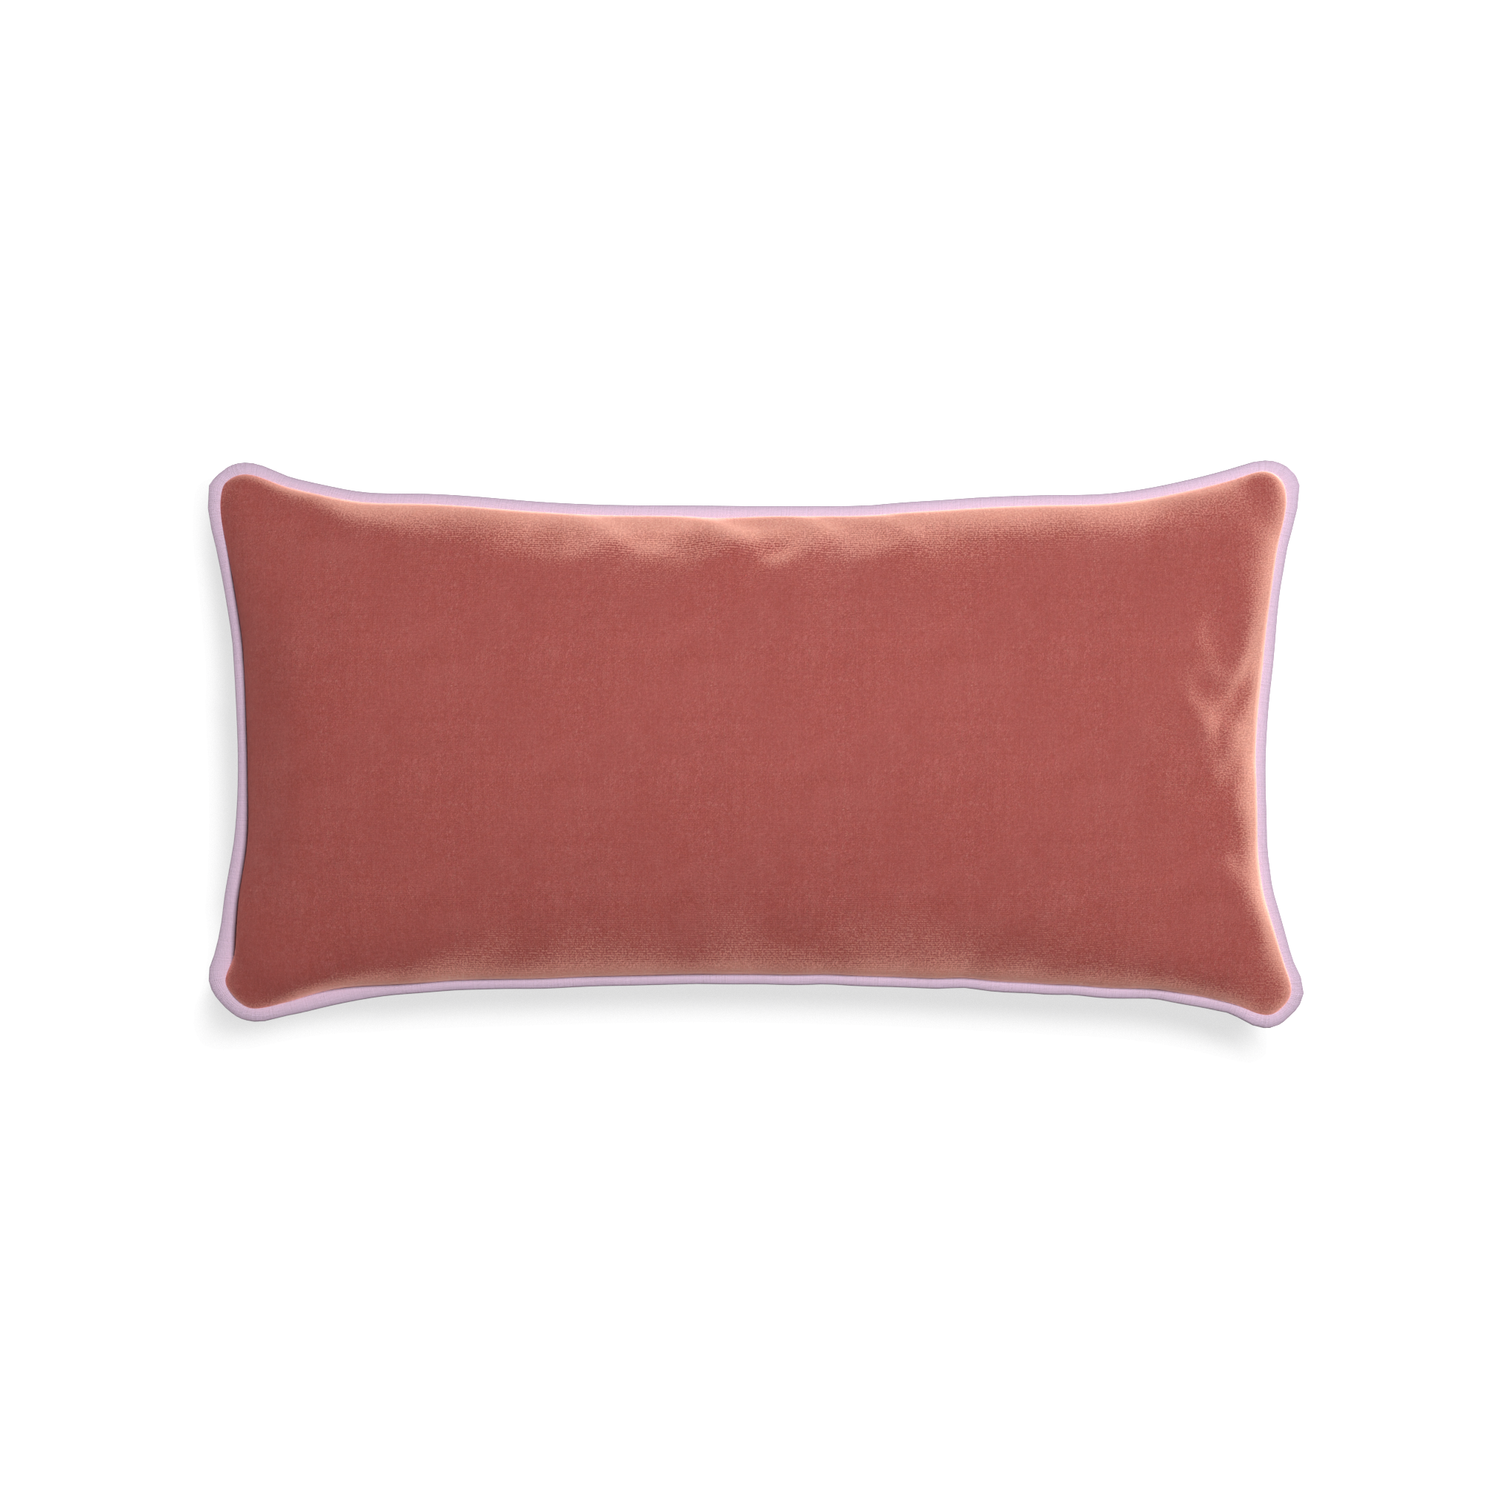 Midi-lumbar cosmo velvet custom coralpillow with l piping on white background